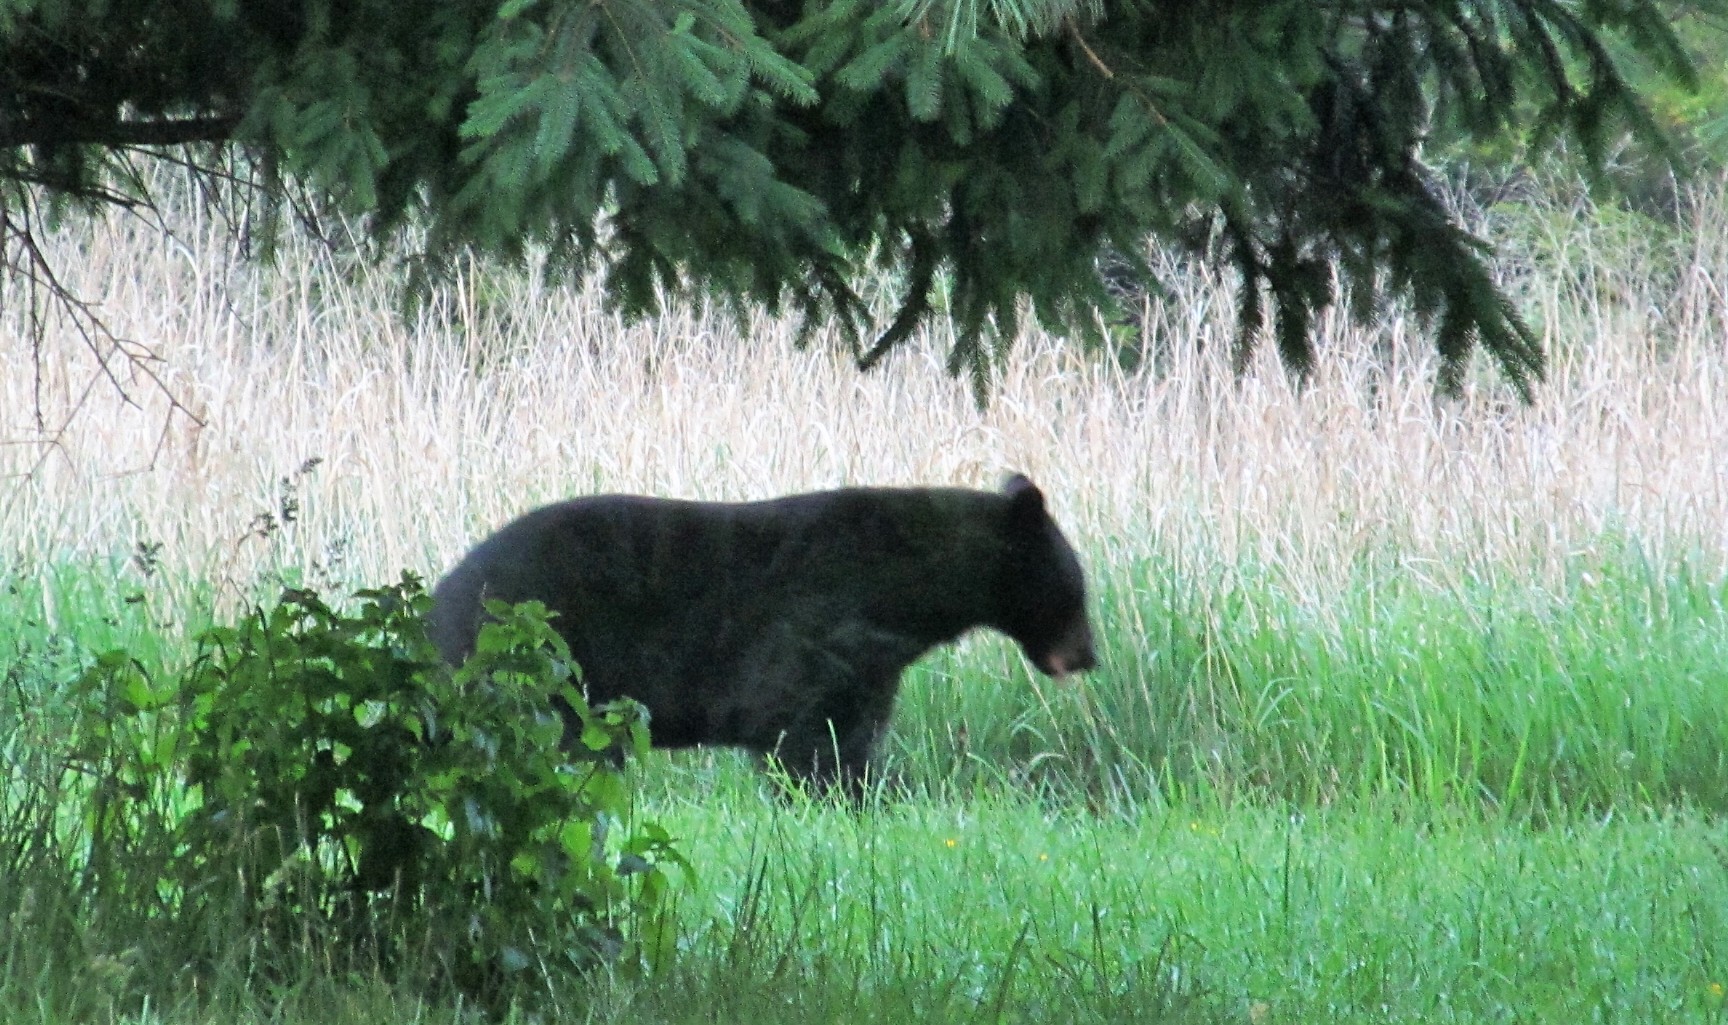 An image of a black bear of medium size suggesting that it is a young adult